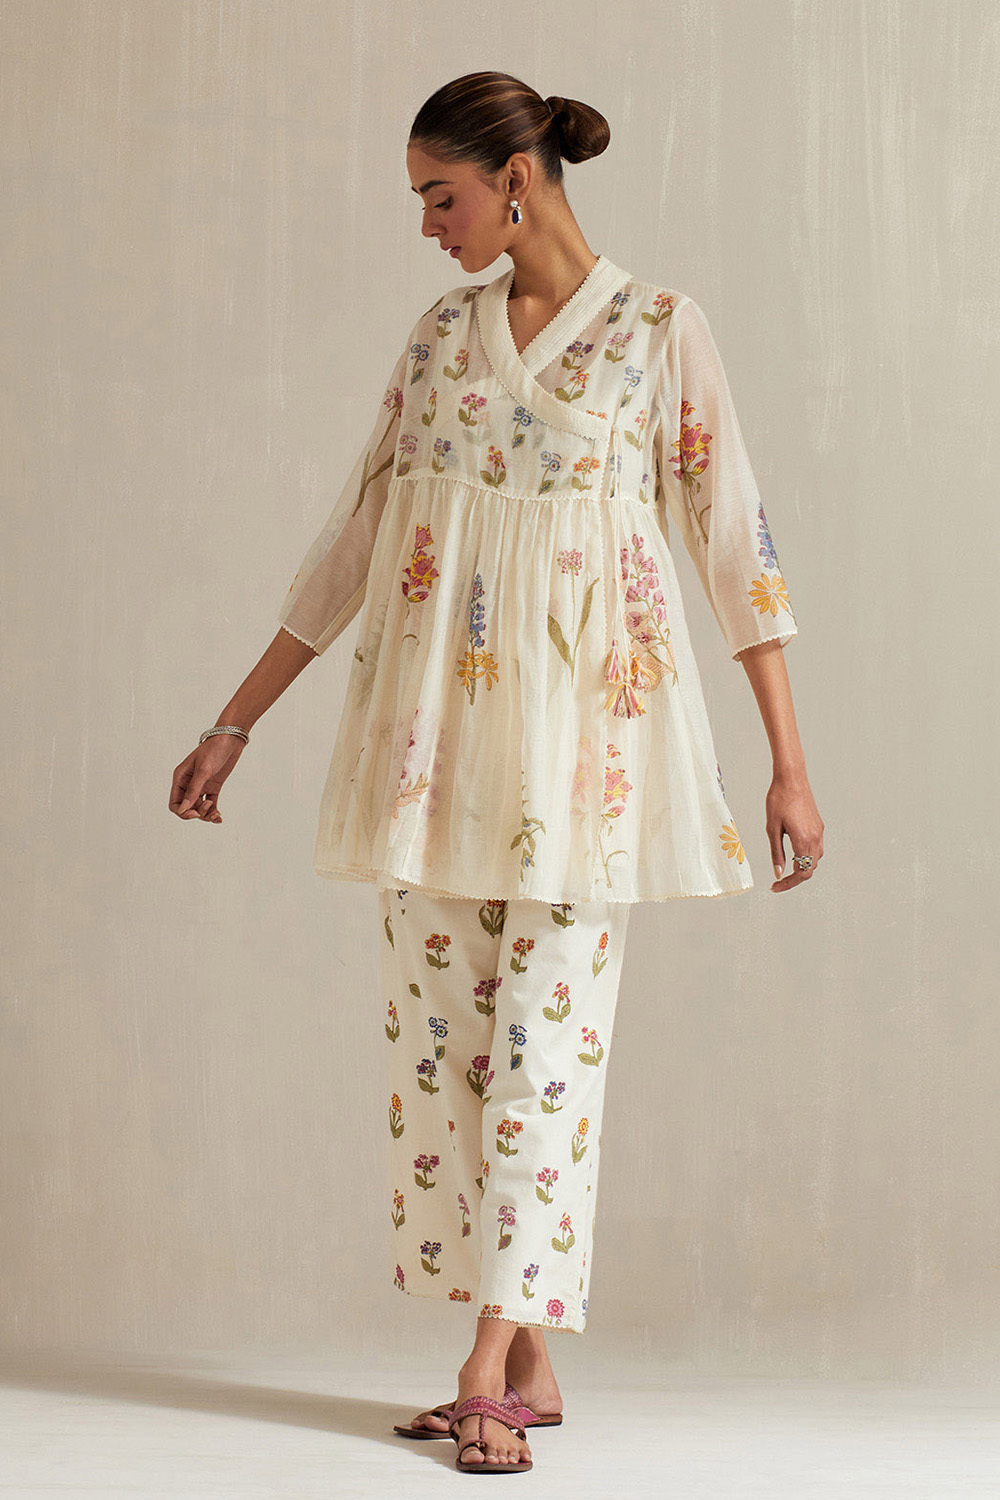 Off White Hand Block Printed Short Angrakha Kurta With Straight Ankle Length Pants